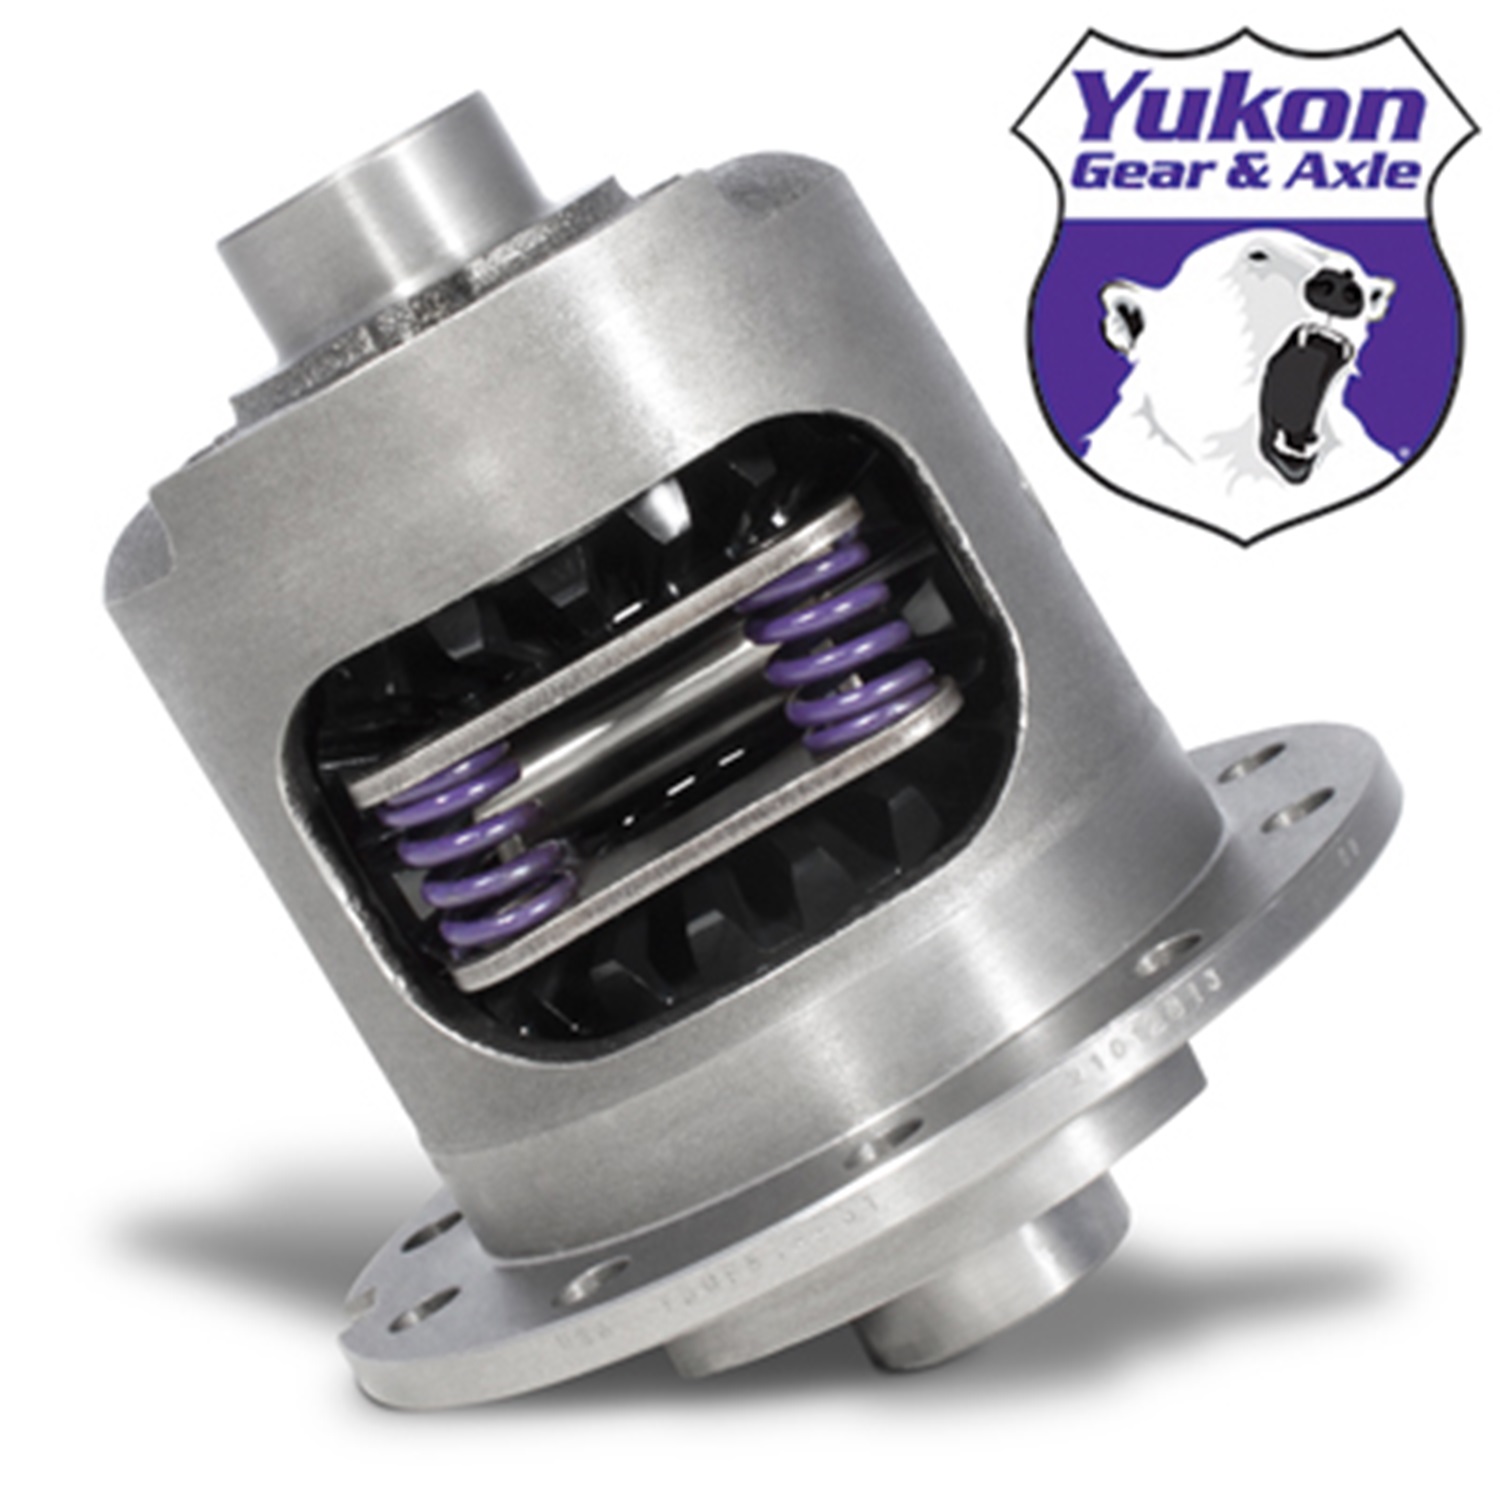 Yukon Gear & Axle Yukon Gear & Axle YDGF8.8-31-1 Yukon Dura Grip Differential